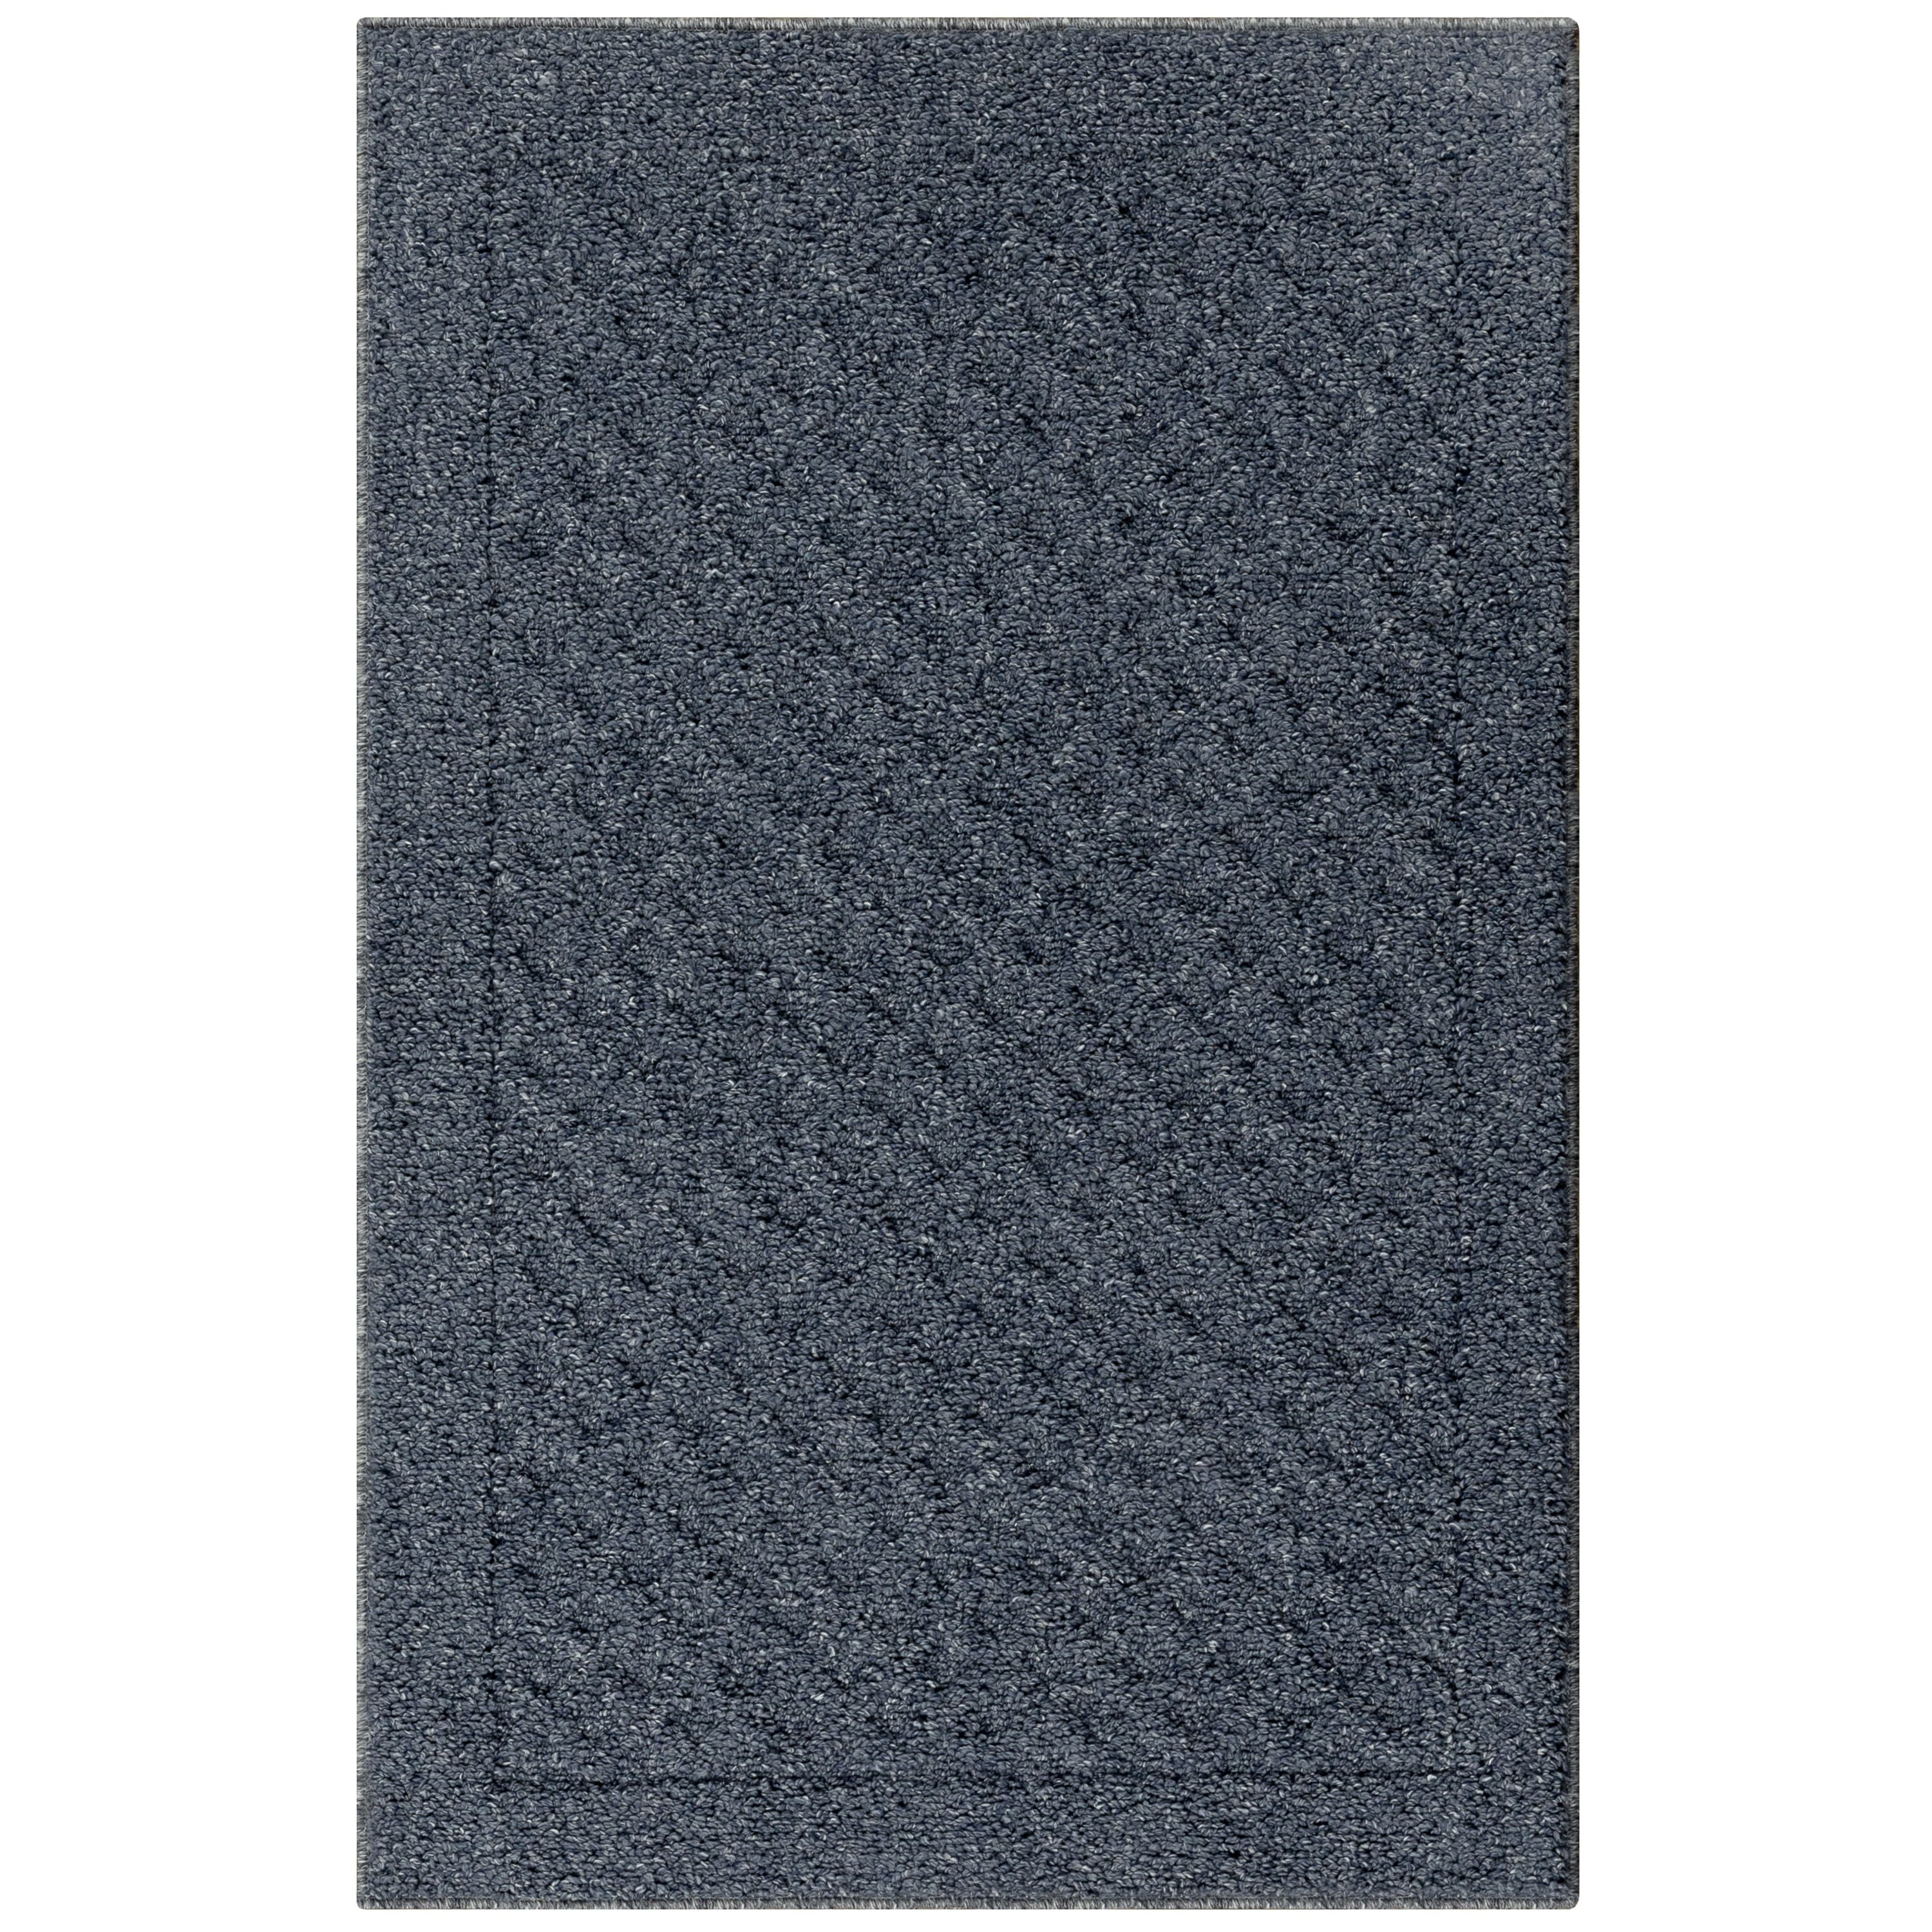 Mainstay Pewter Chenille Texture